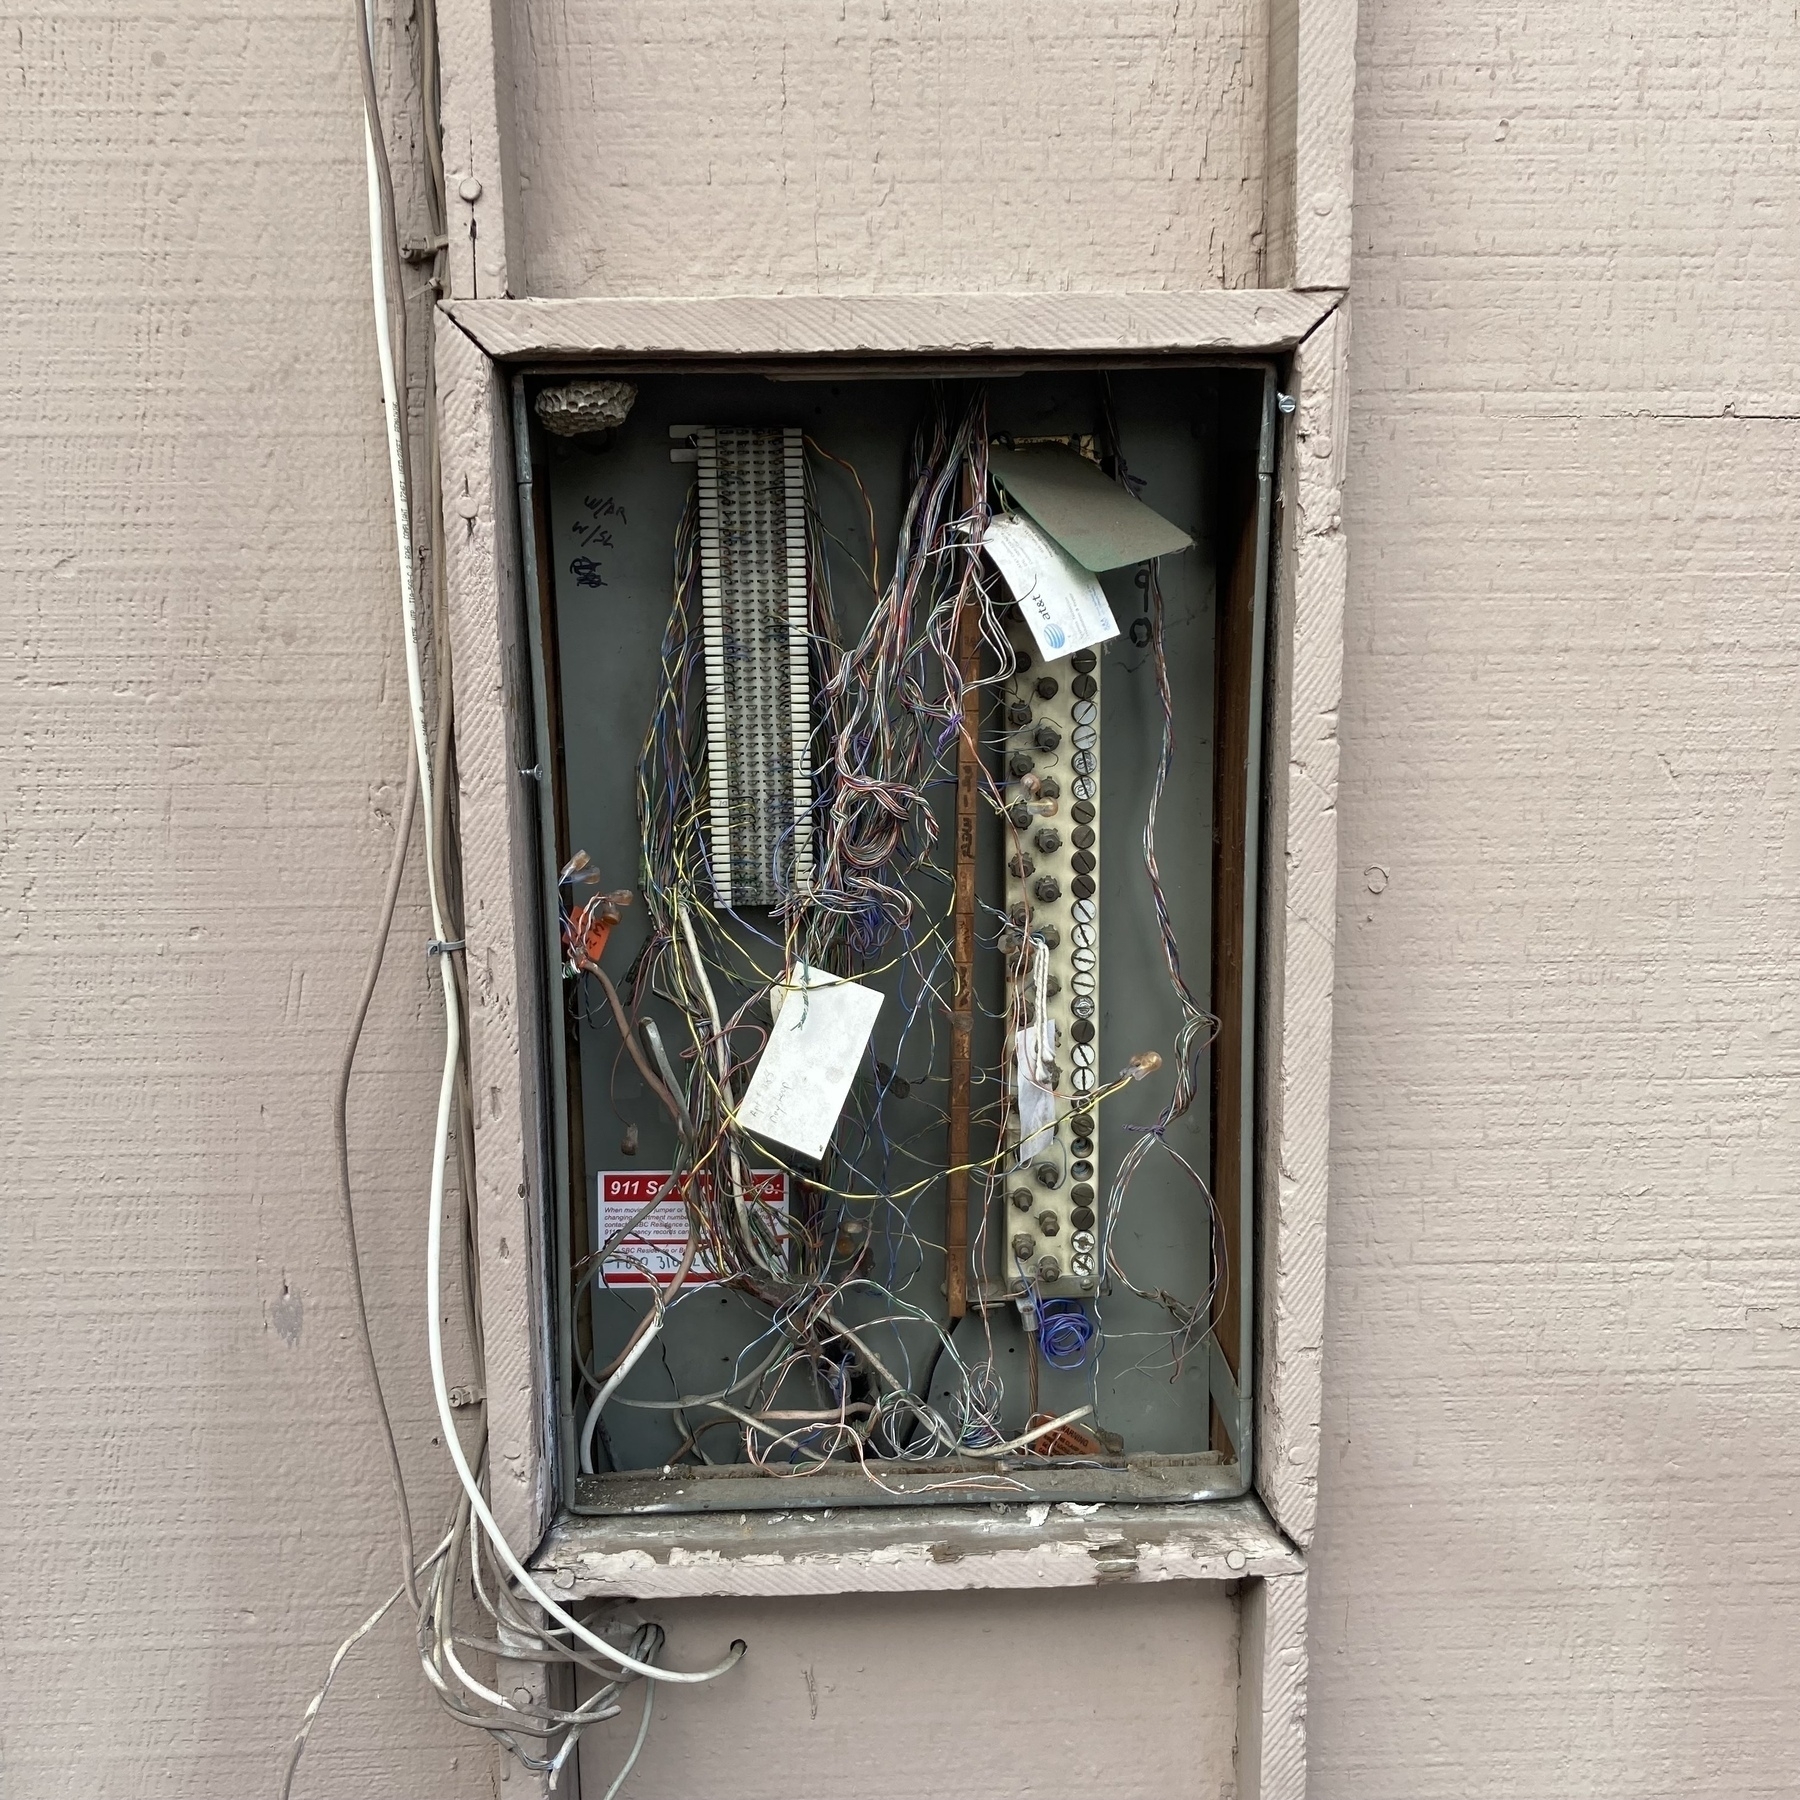 Phone wires exposed. 